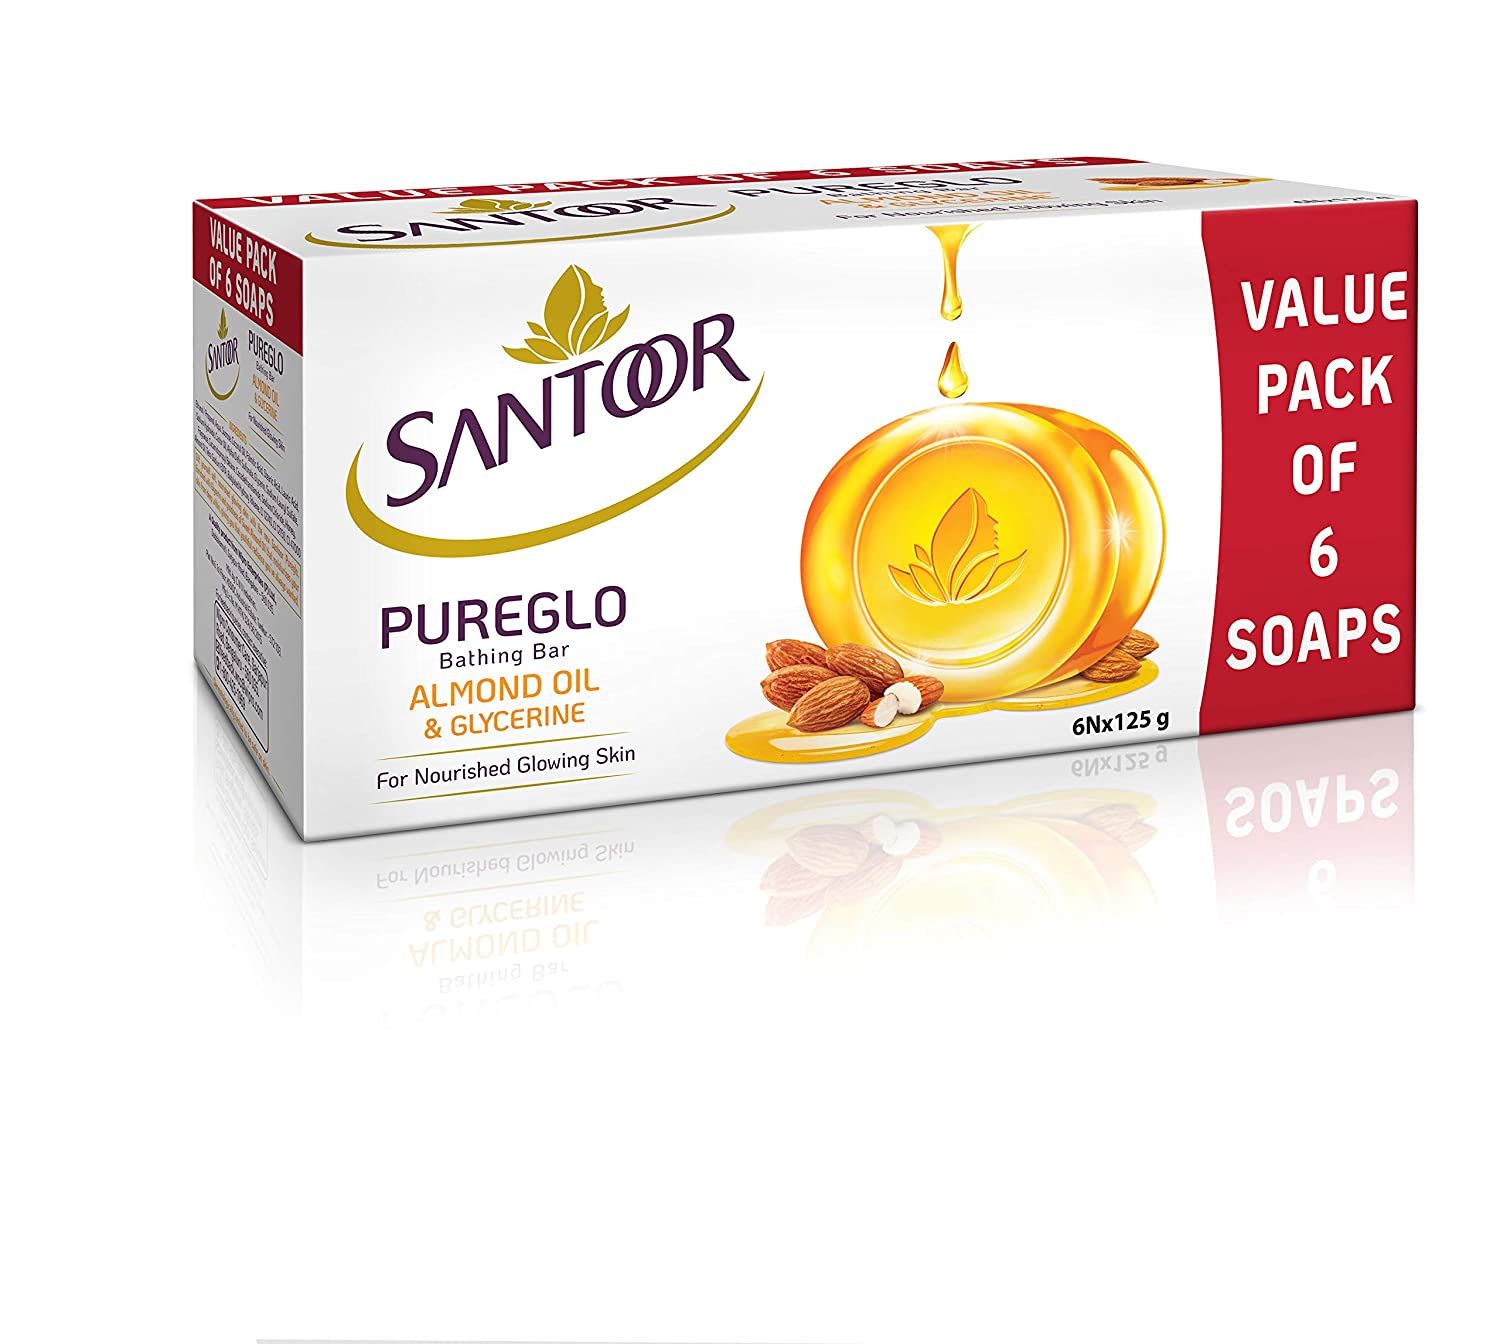 Santoor PureGlo Glycerine Soap with Almond Oil and Glycerine, 125g (Pack of 6) 